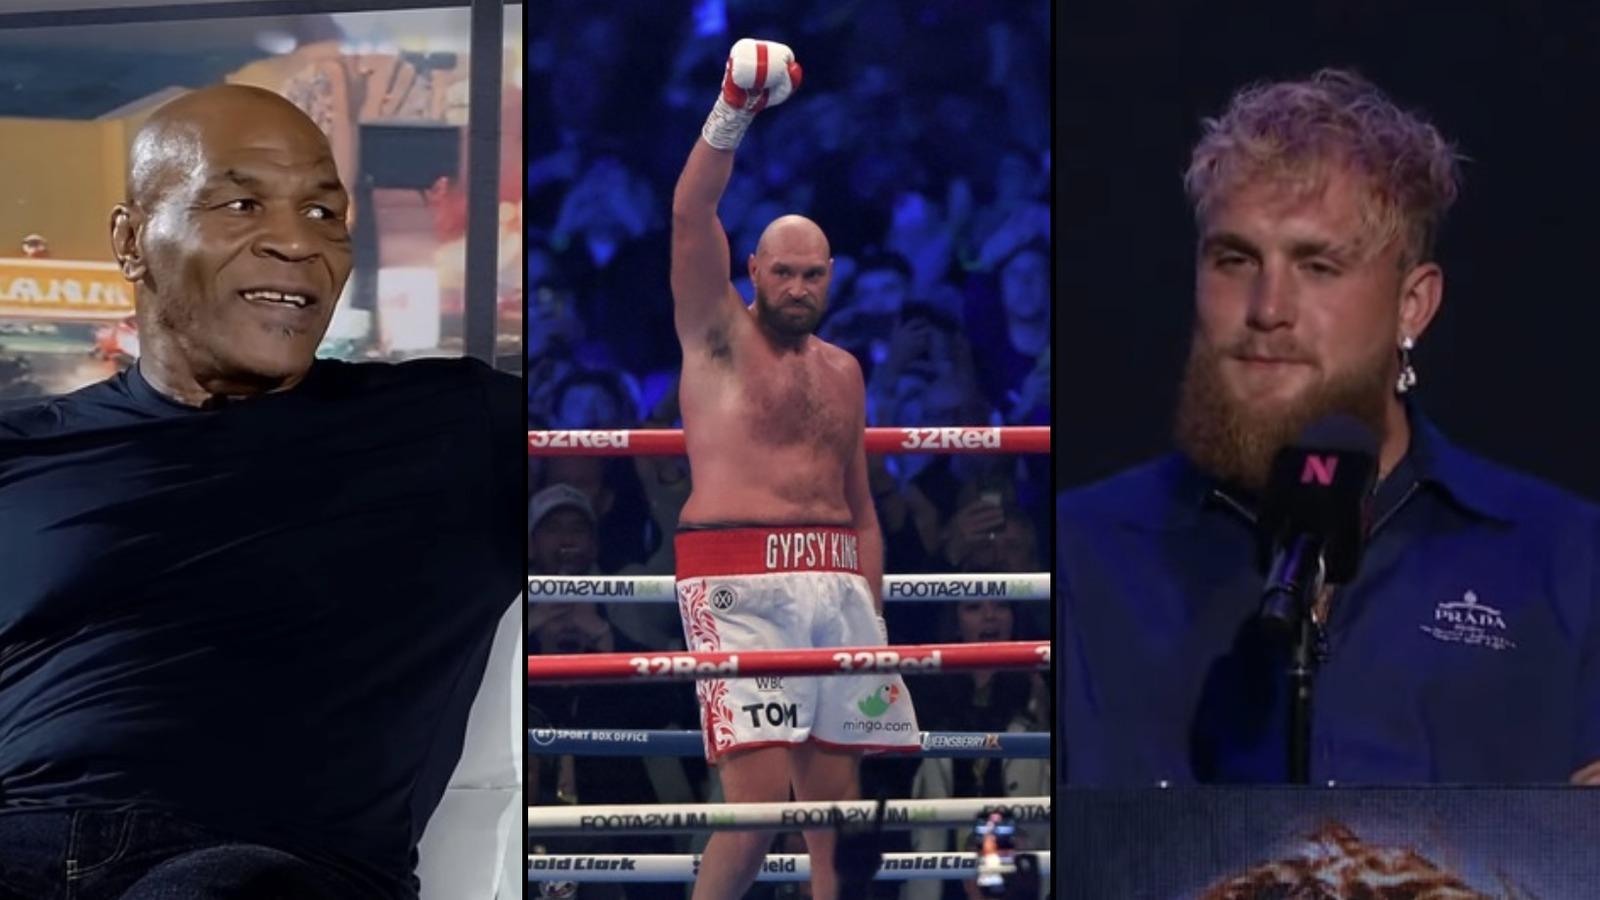 Boxing champion Tyson Fury gave his prediction for the Jake Paul vs Mike Tyson boxing match.